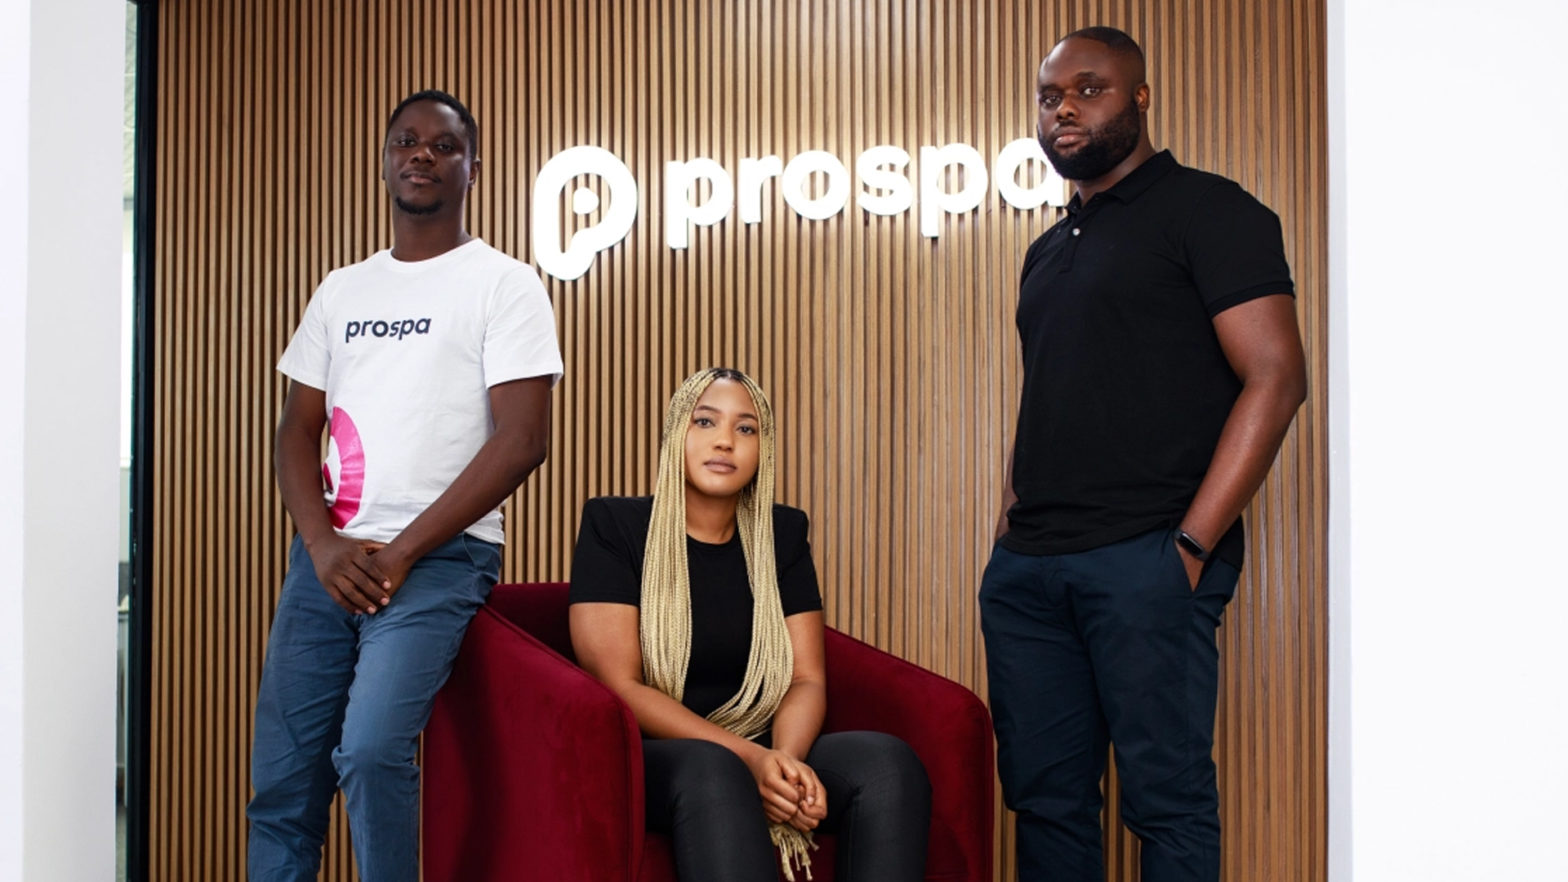 Fintech Startup Prospa Raises $3.8M Pre-Seed Round To Bring Banking And Software Services To Small Businesses